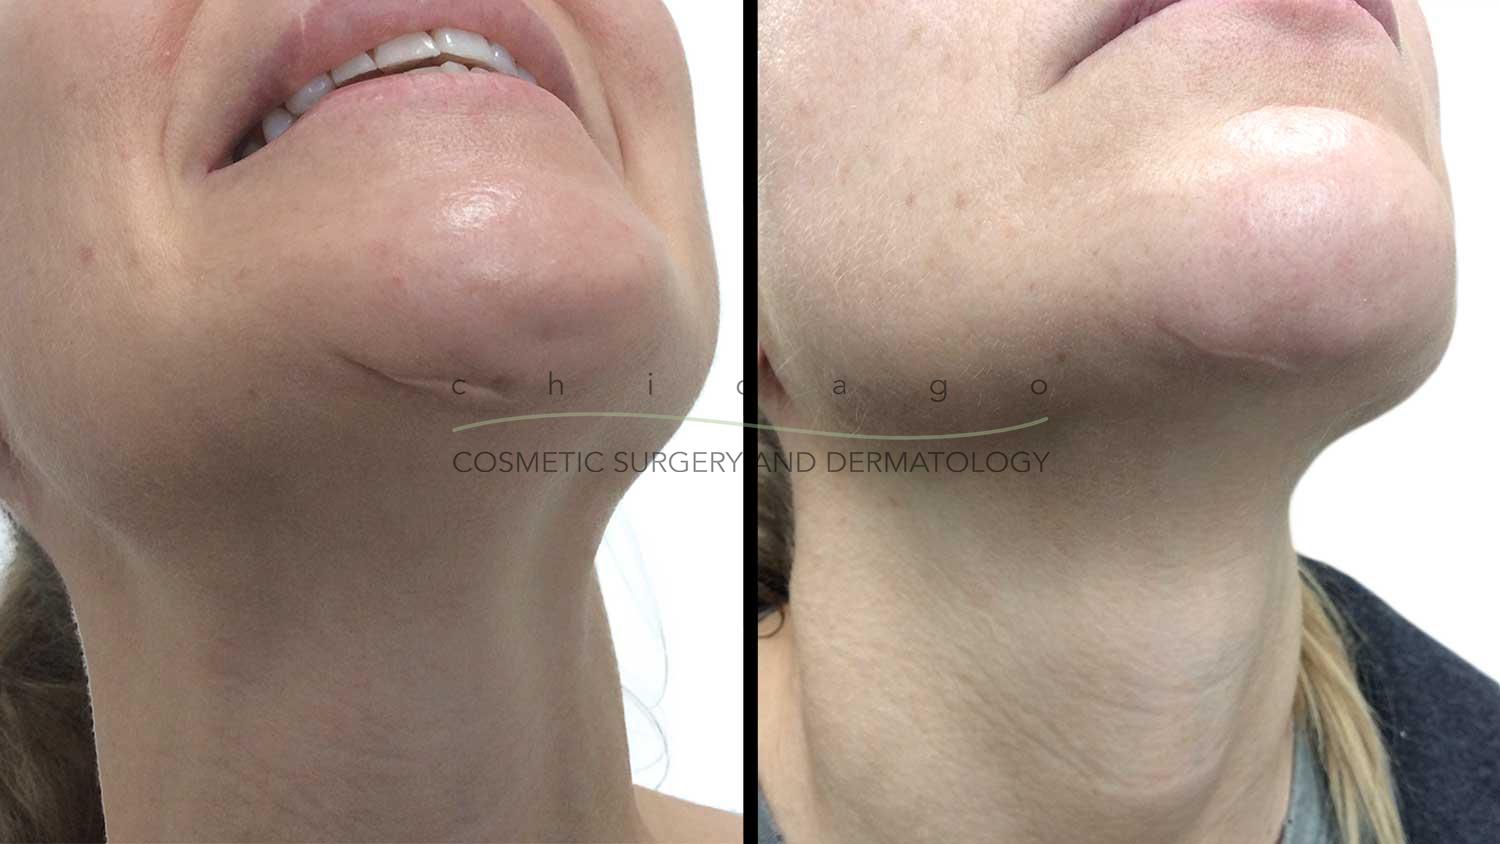 Results of Bellafill injectable filler for scars with Dr. Fine